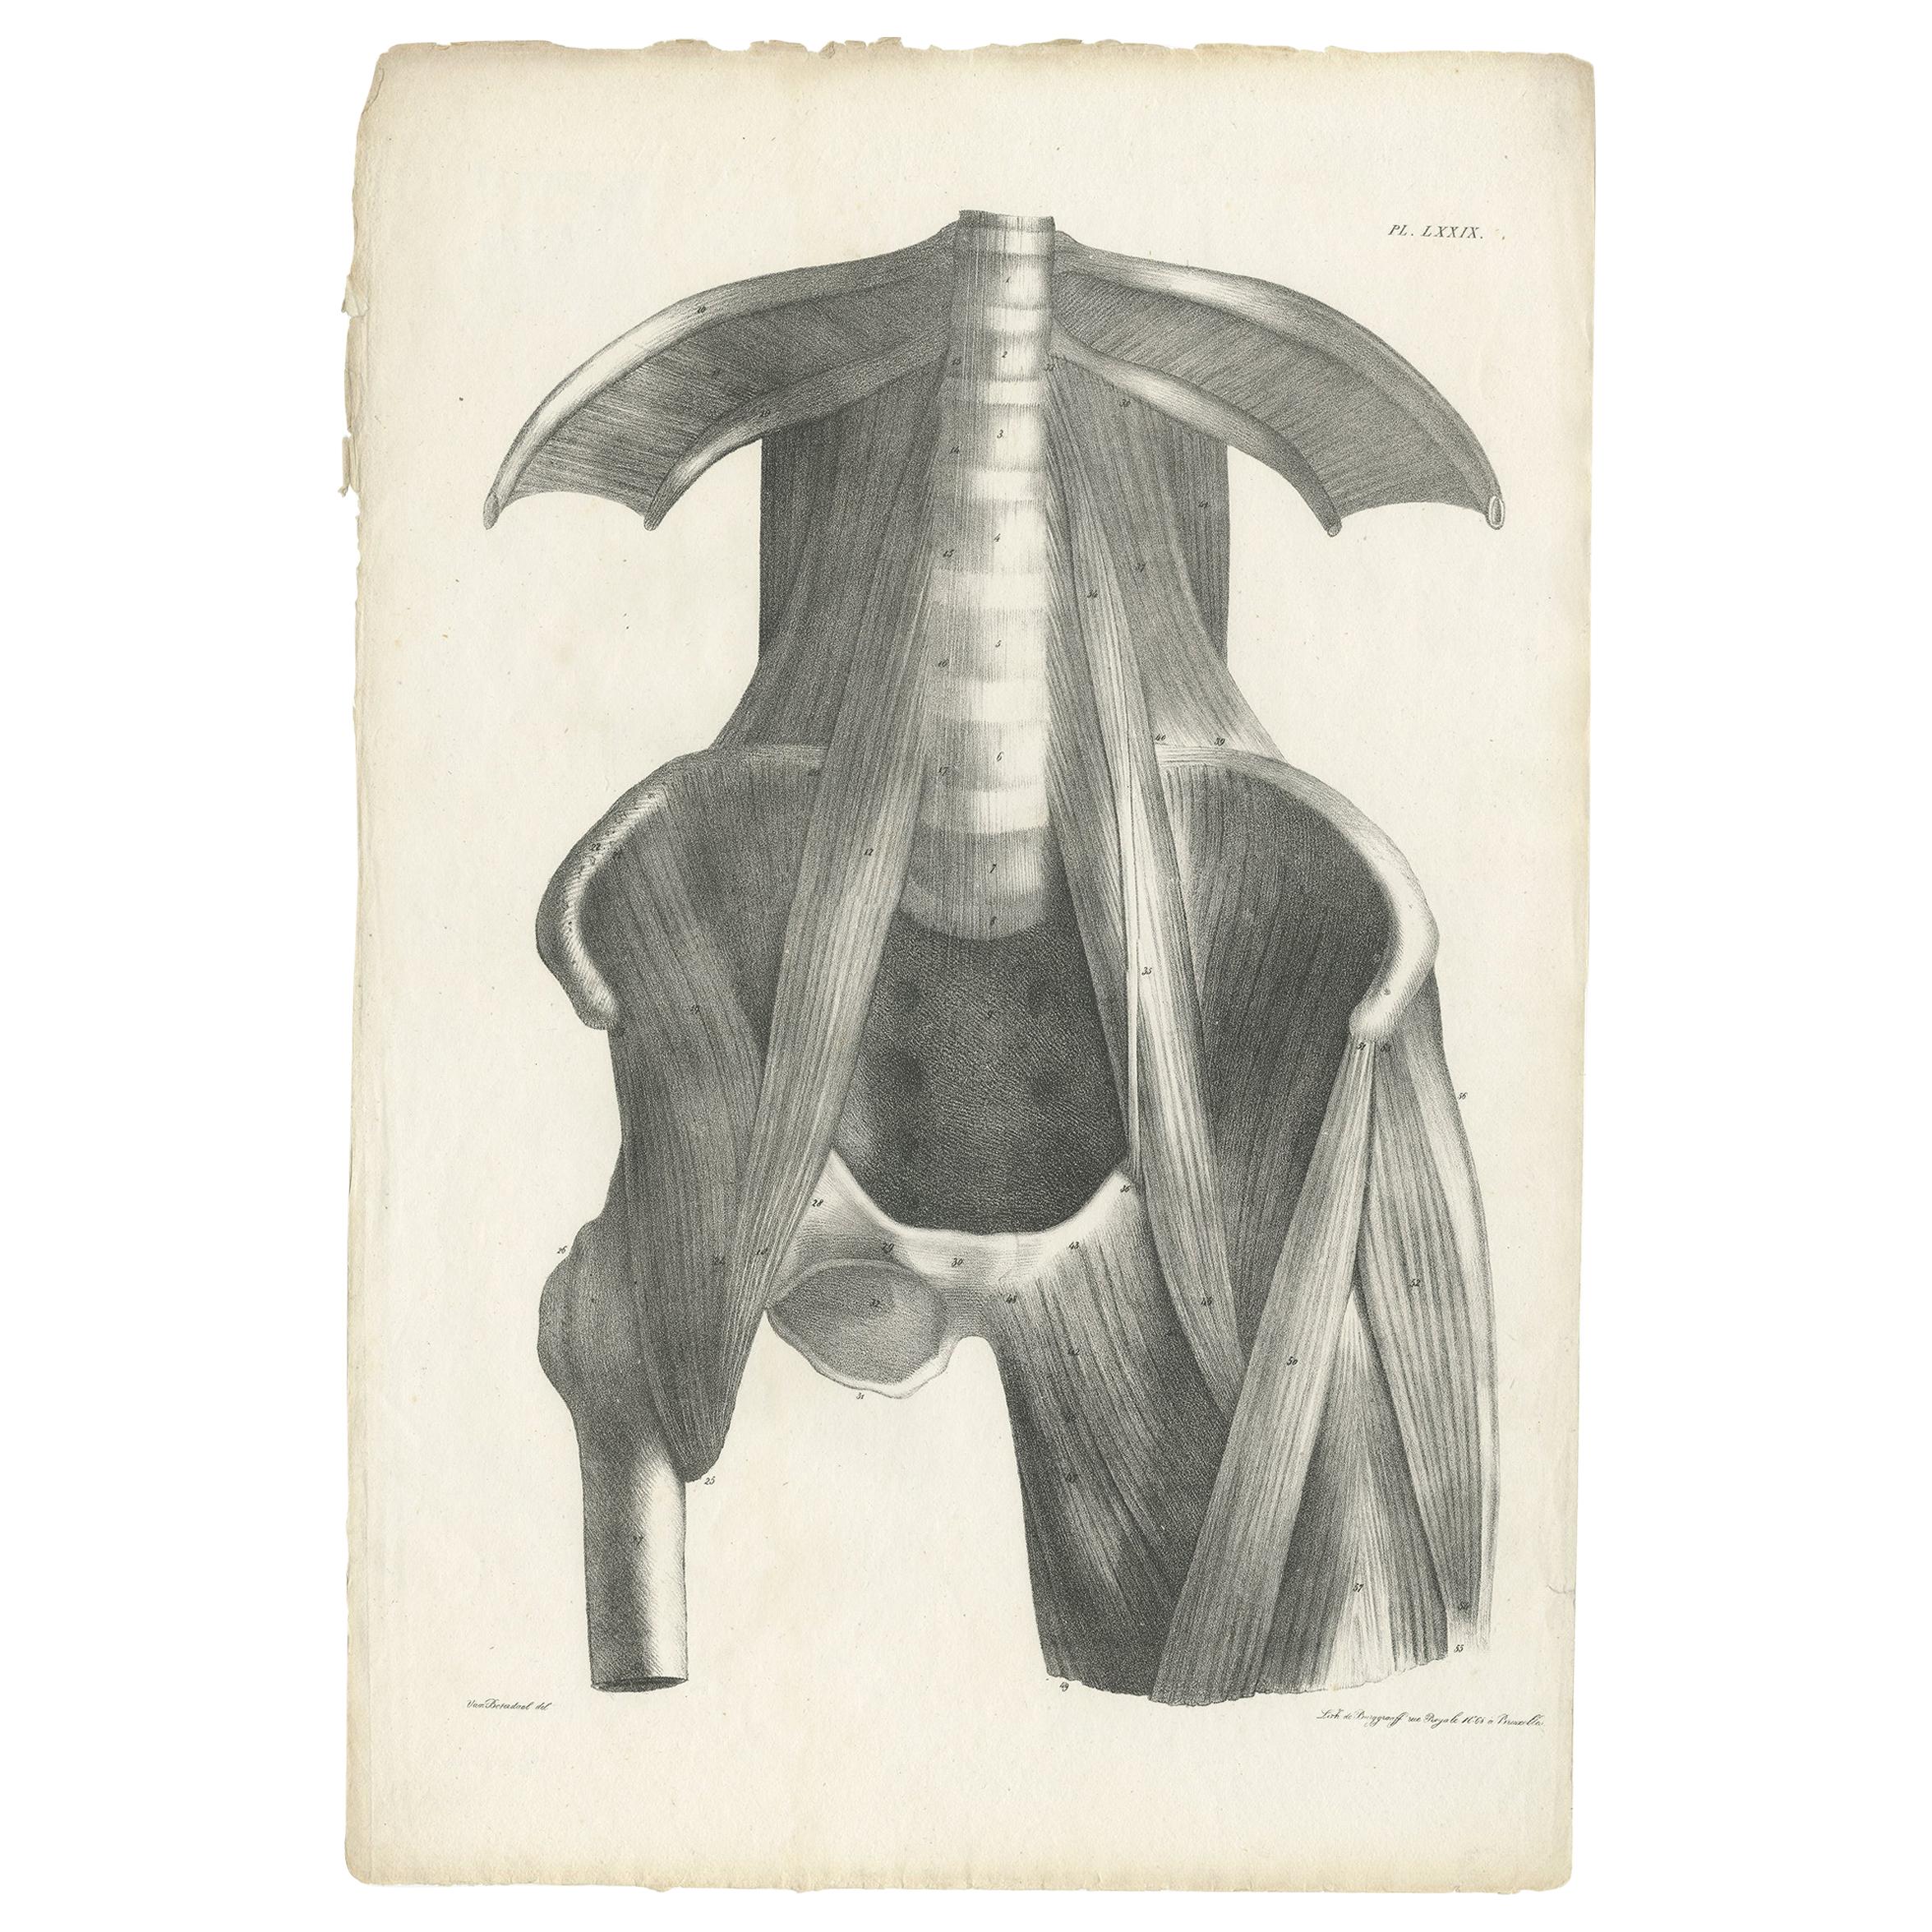 Pl. LXXIX Antique Anatomy / Medical Print of the Thigh by Cloquet '1821' For Sale